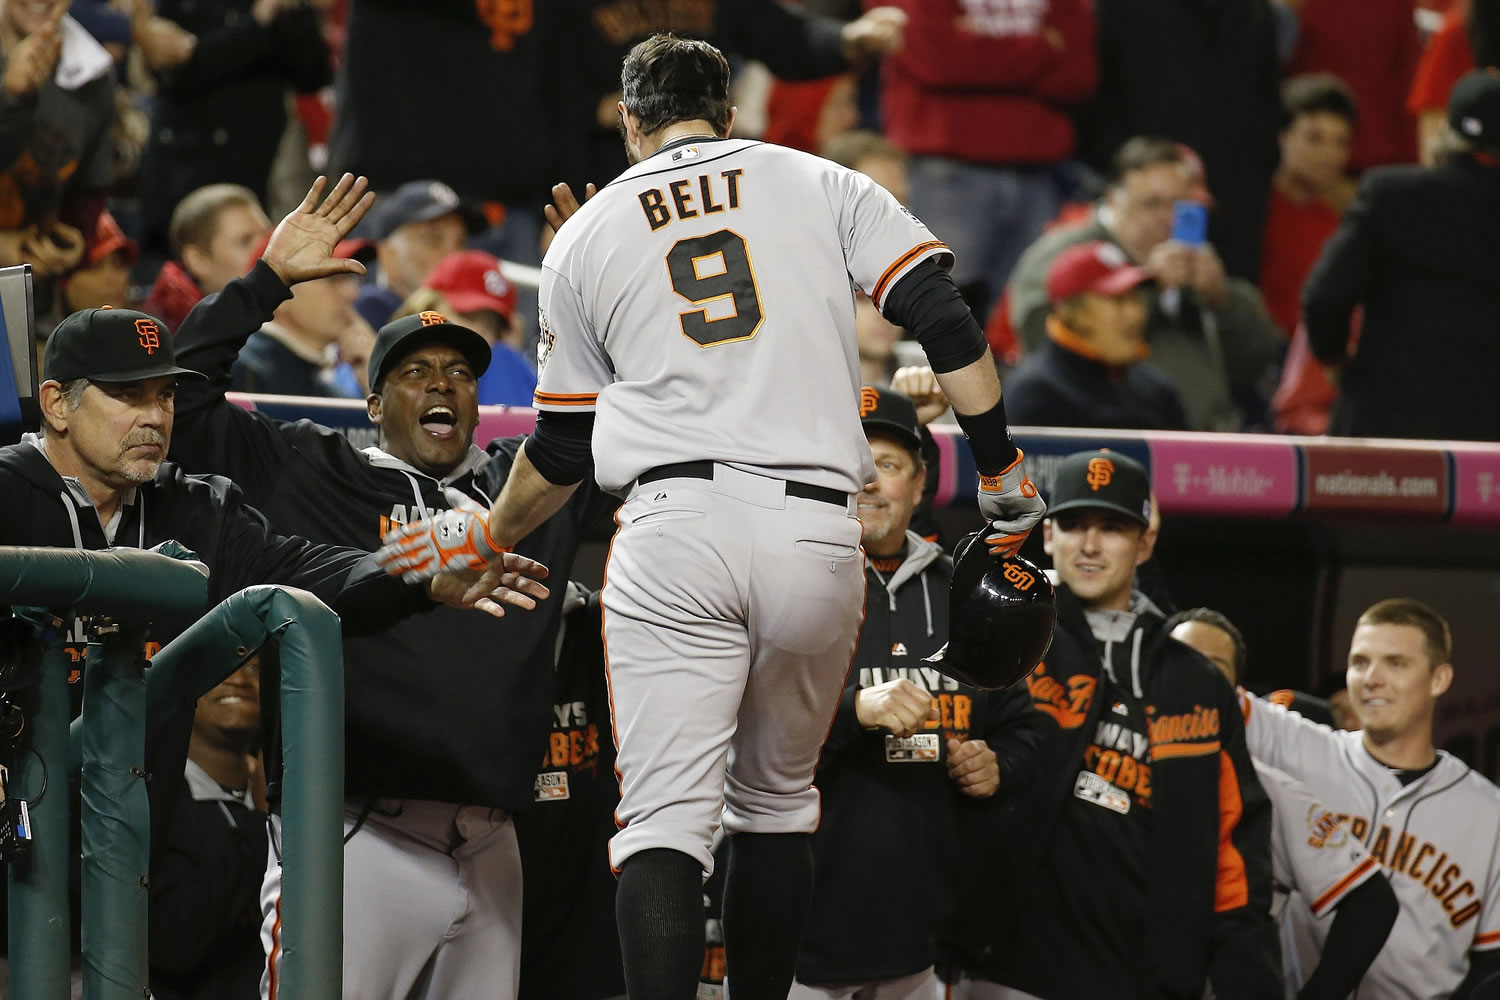 San Francisco Giants' Brandon Belt (9) is cheered as he returns to the dugout after his solo home run in the 18th inning of Game 2 of the NL Division Series against the Washington Nationals in Nationals Park, Saturday, Oct. 4, 2014, in Washington.